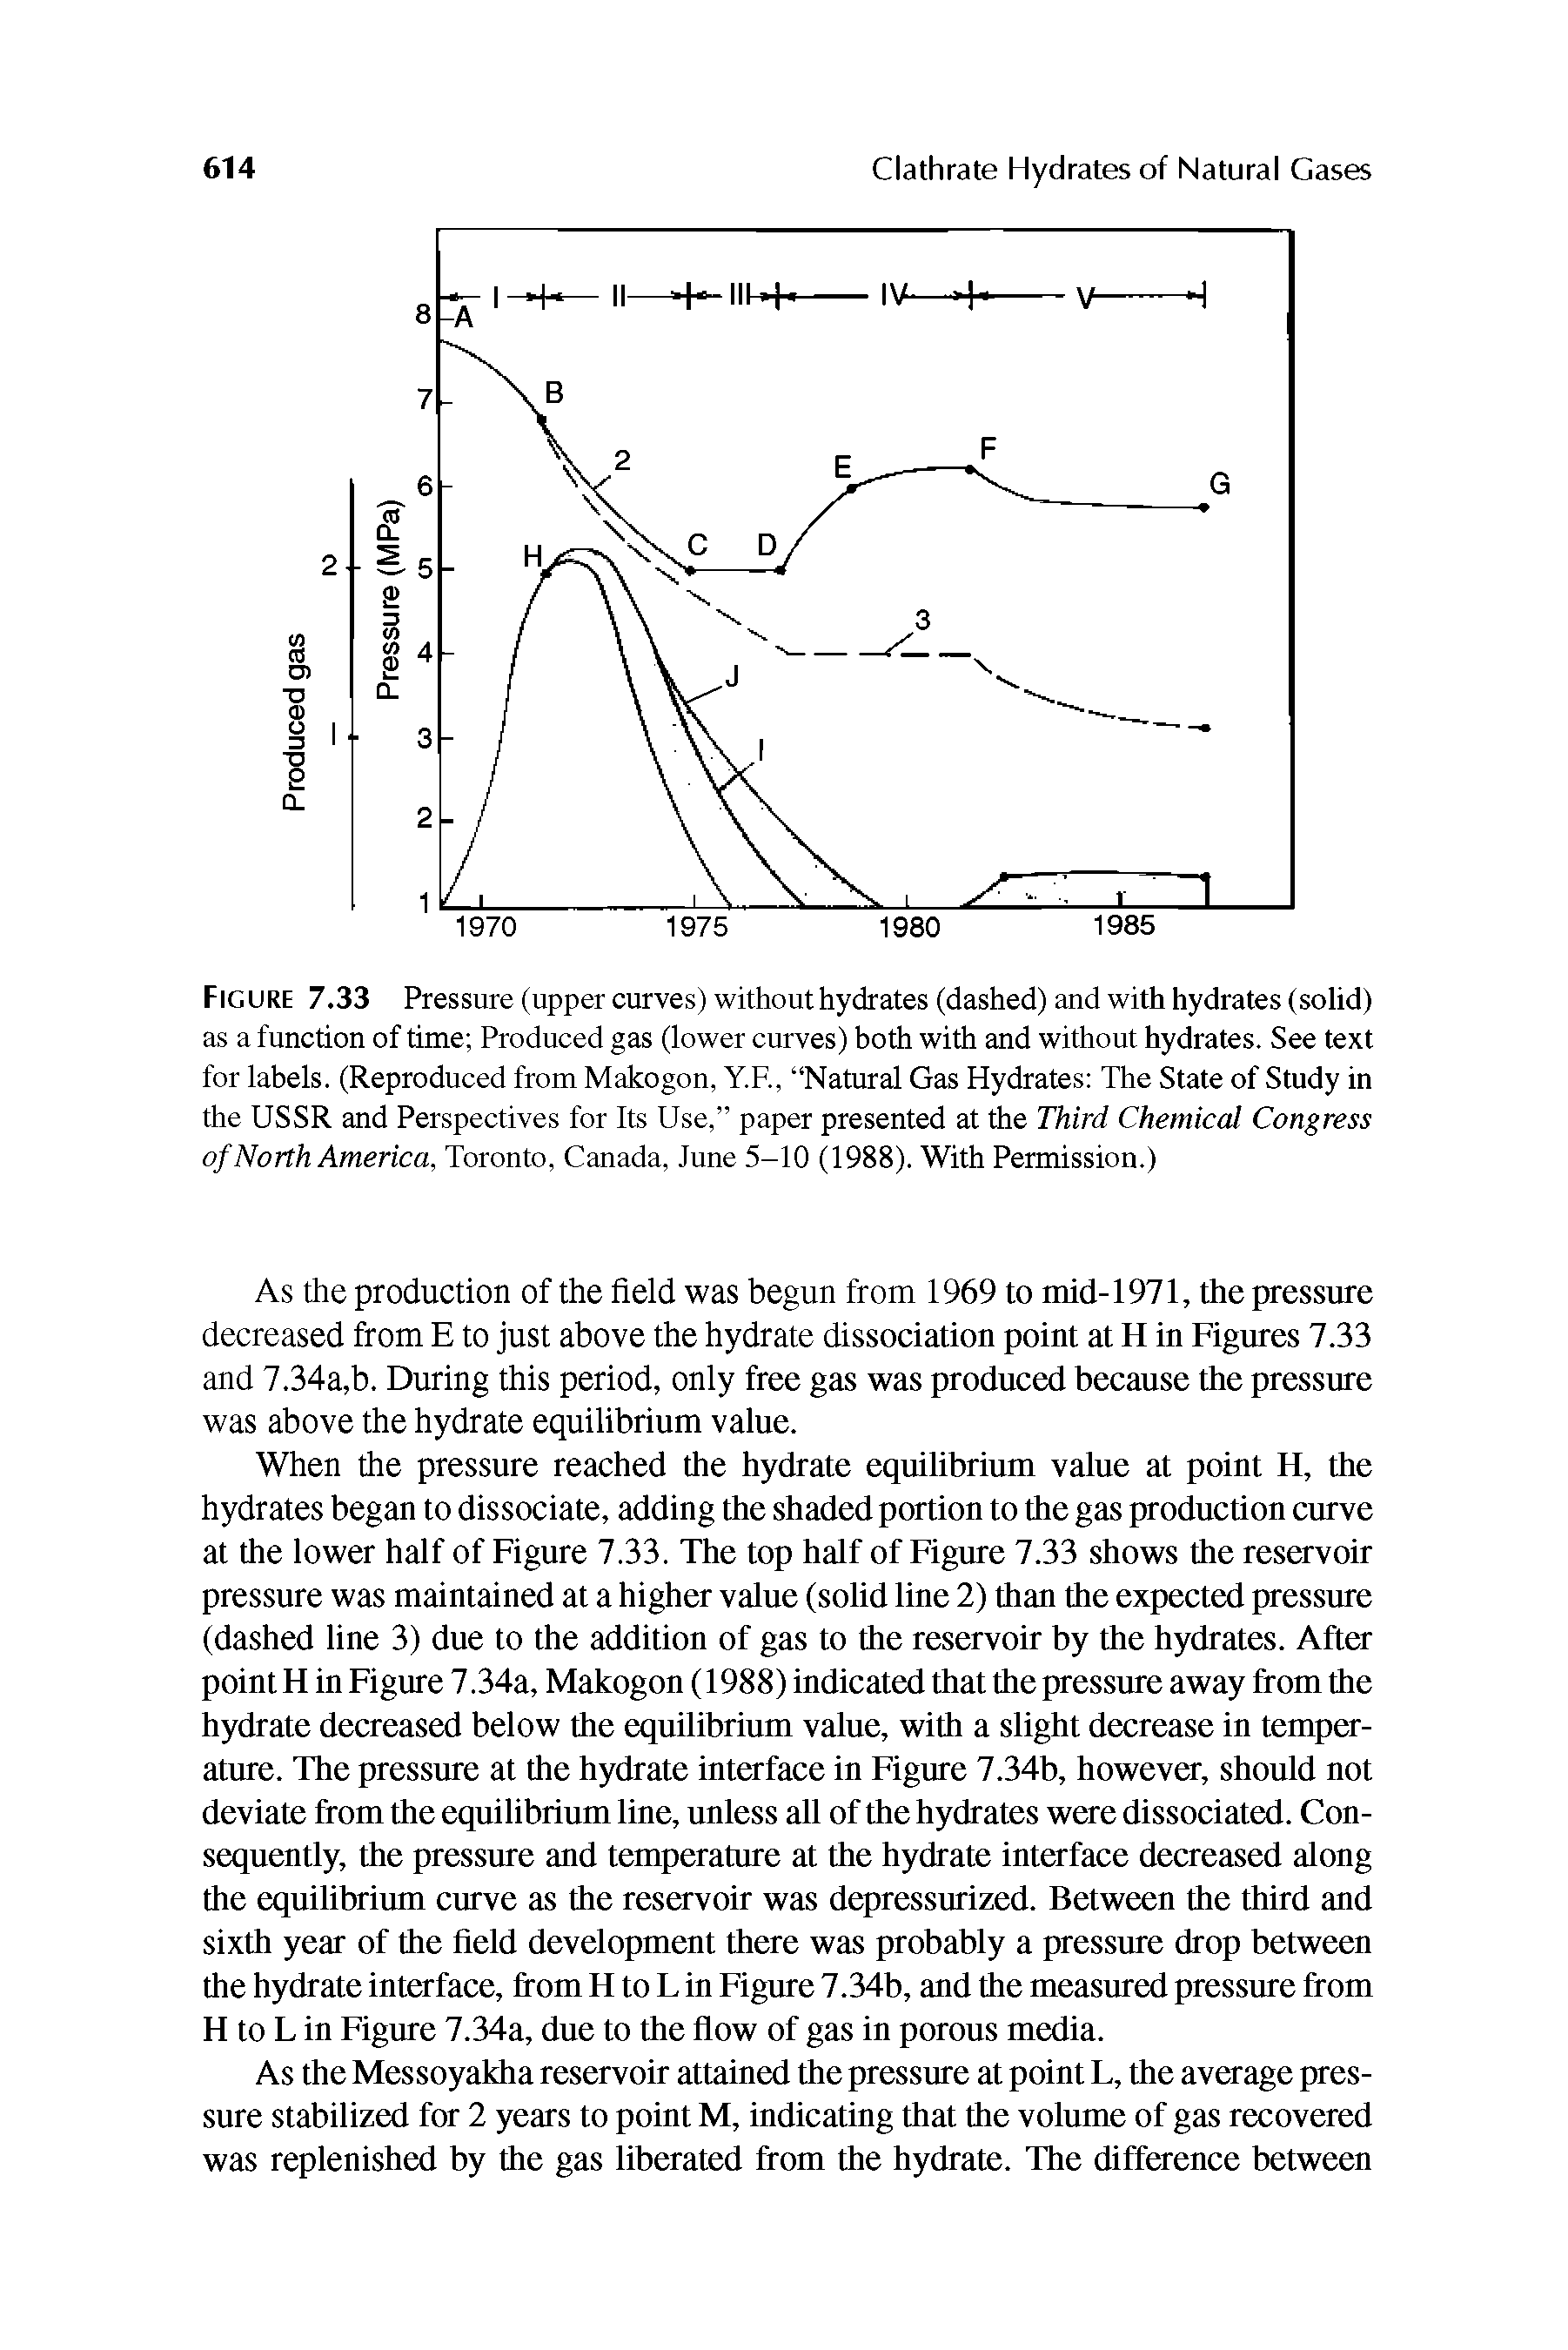 Figure 7.33 Pressure (upper curves) without hydrates (dashed) and with hydrates (solid) as a function of time Produced gas (lower curves) both with and without hydrates. See text for labels. (Reproduced from Makogon, Y.F., Natural Gas Hydrates The State of Study in the USSR and Perspectives for Its Use, paper presented at the Third Chemical Congress of North America, Toronto, Canada, June 5-10 (1988). With Permission.)...